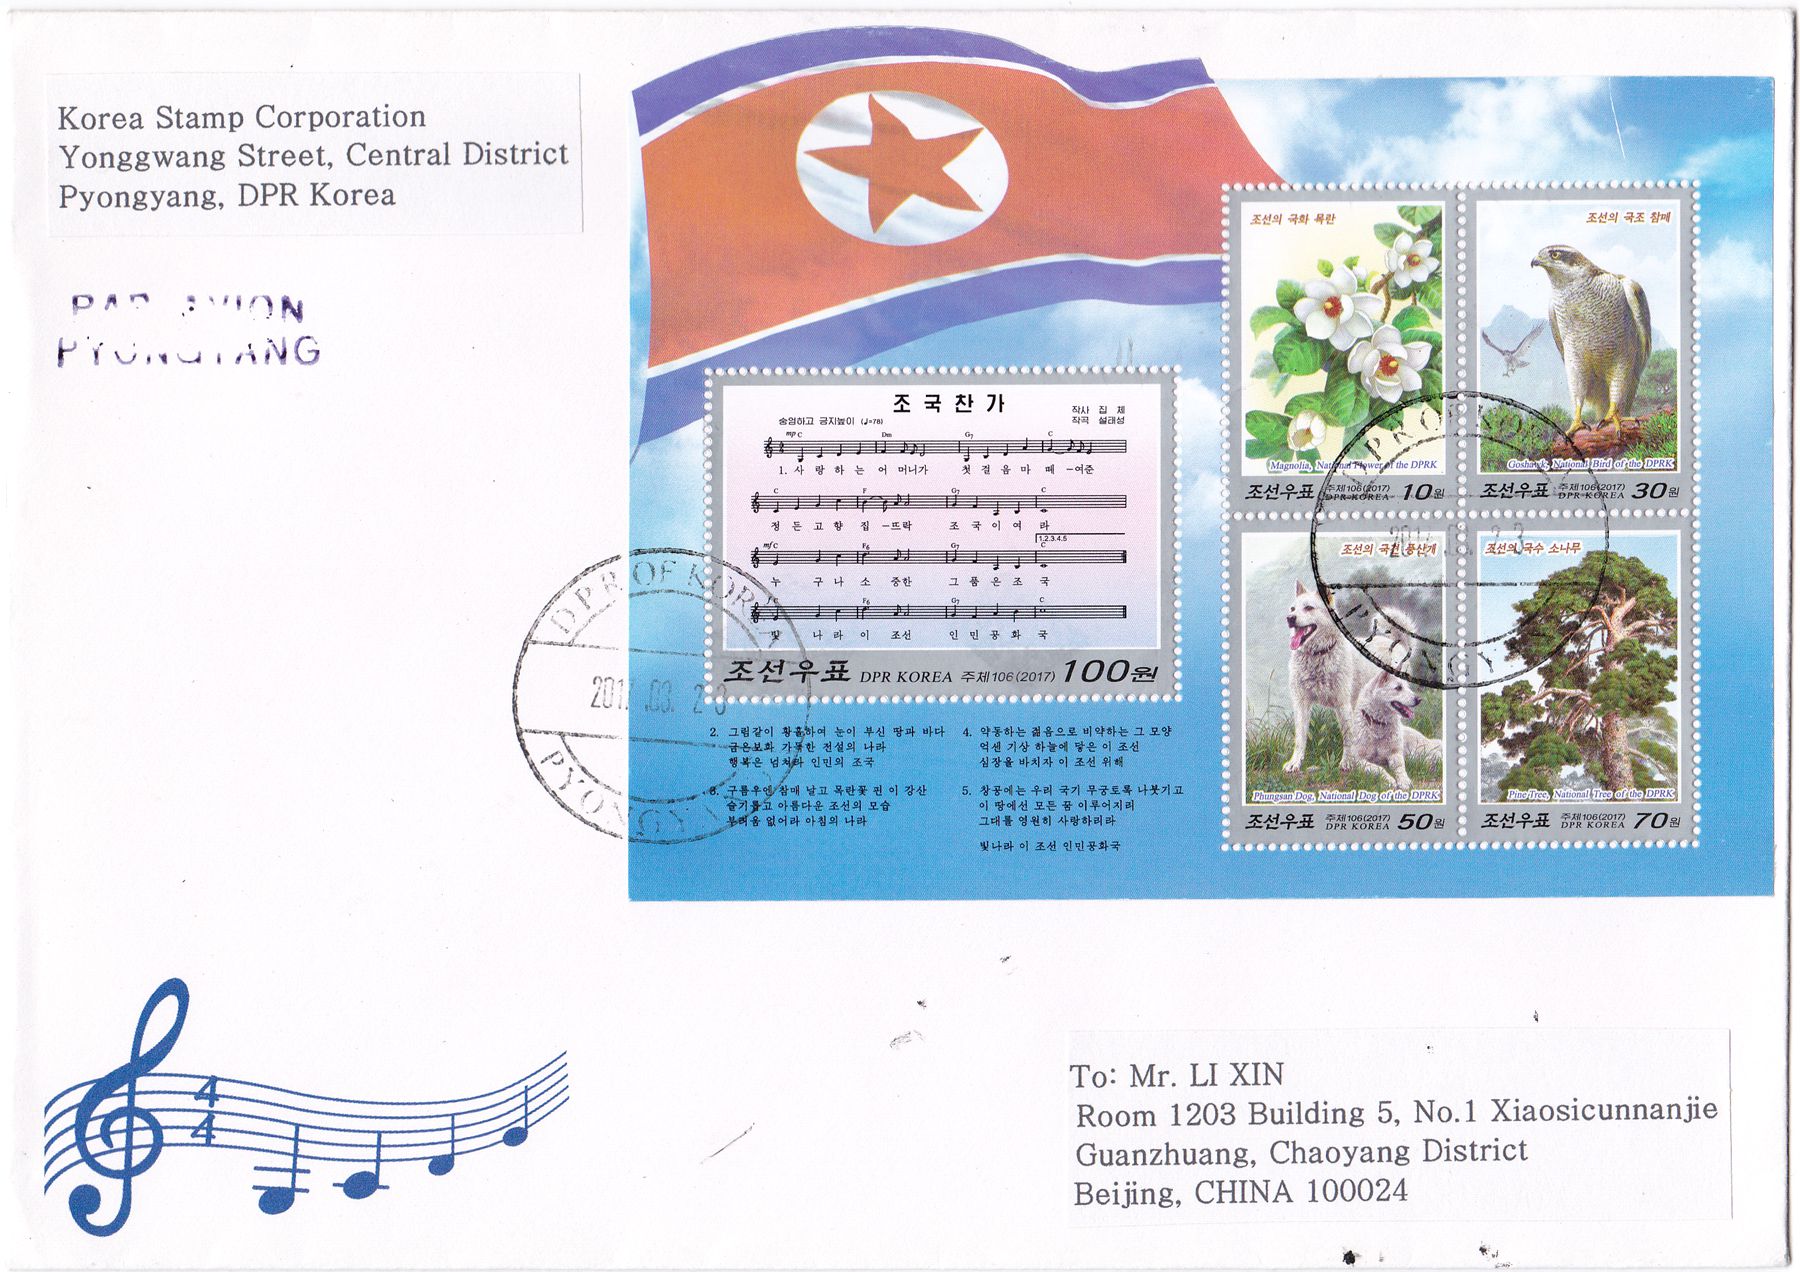 L9680, Korea "Paean to the Motherland", FDC Stamps, from Korea to China 2017